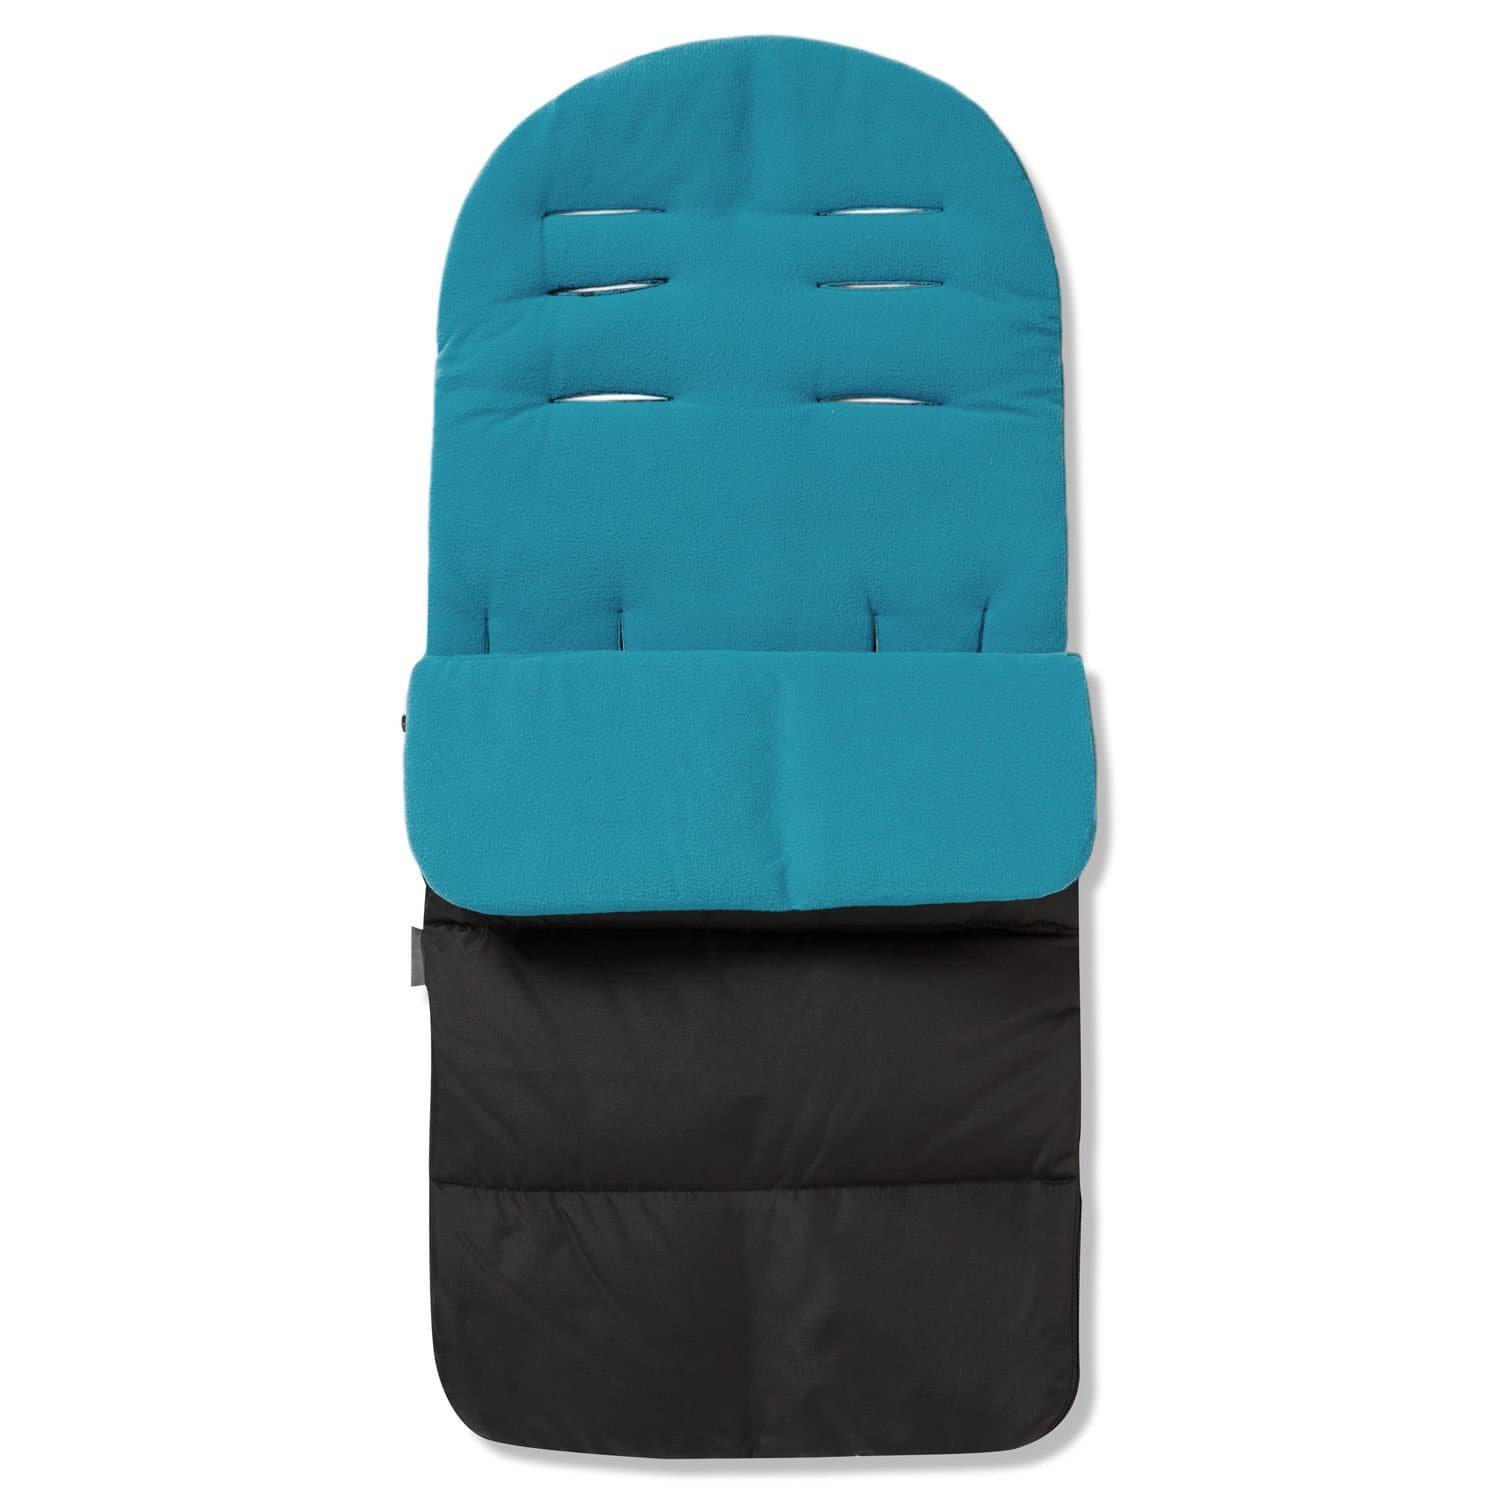 Premium Footmuff / Cosy Toes Compatible with Quinny - Ocean Blue / Fits All Models | For Your Little One